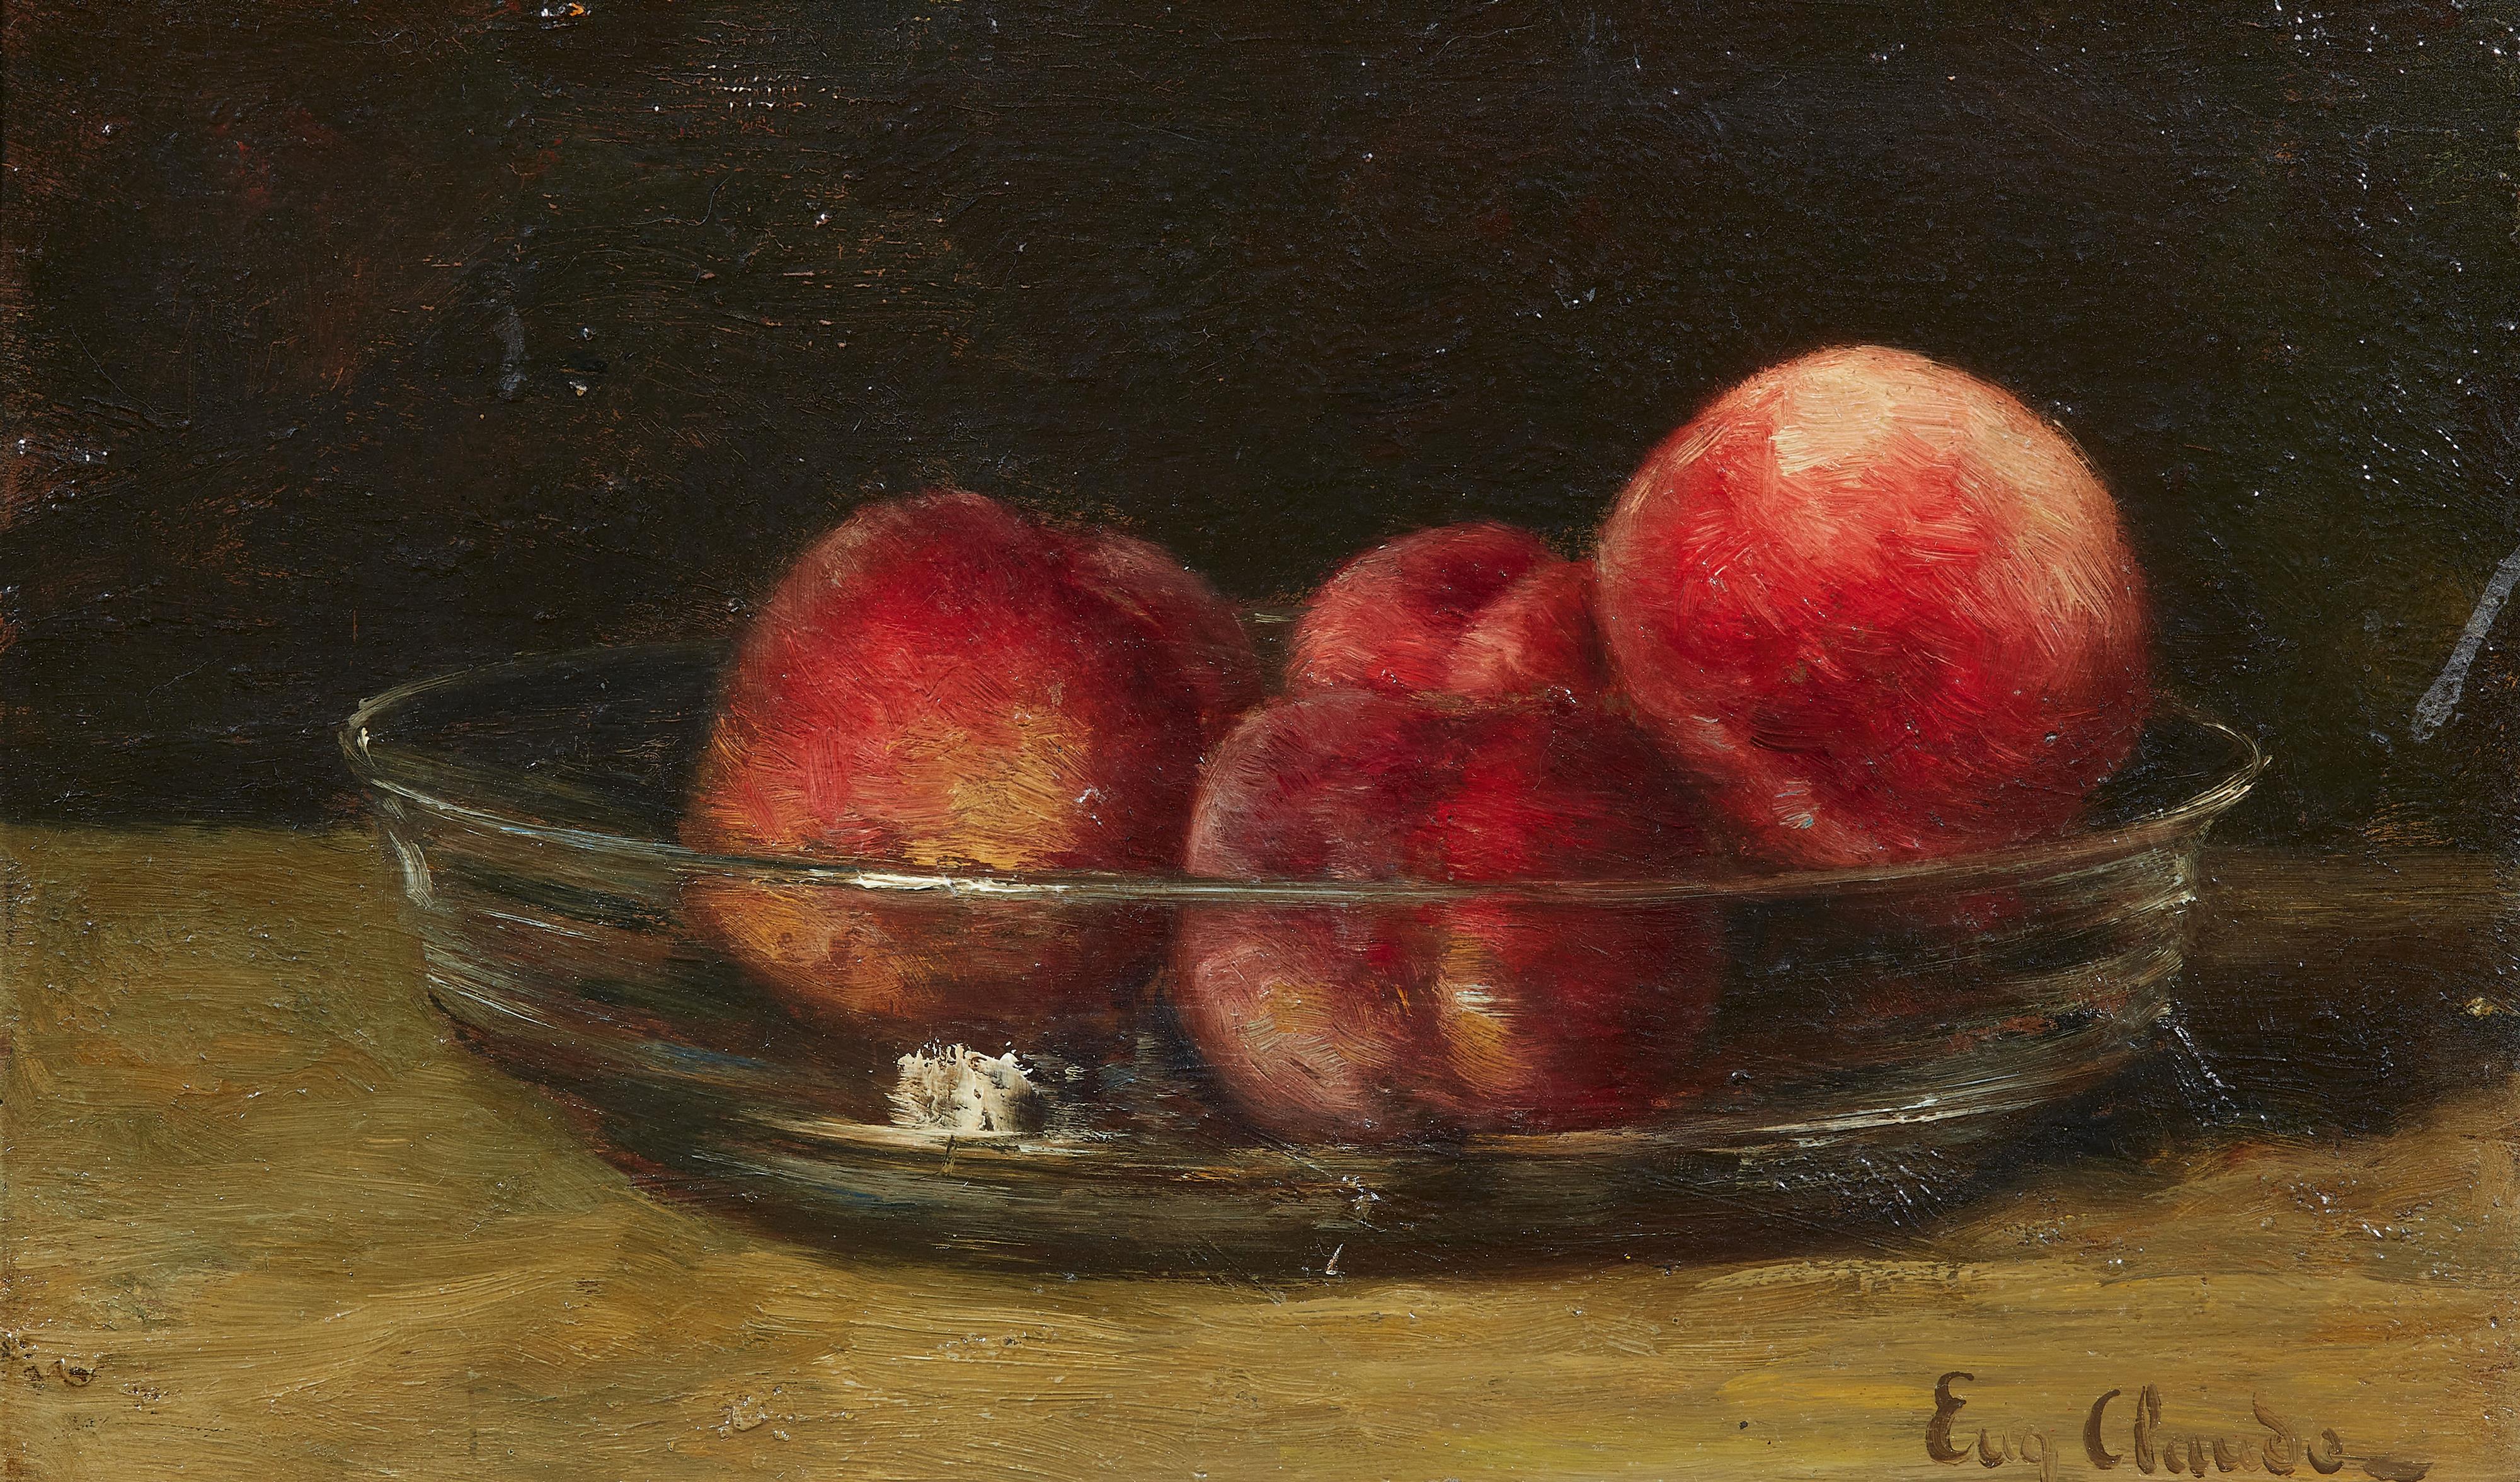 Eugen Claude - A Fruit Still Life with Peaches in a Glass Bowl - image-1